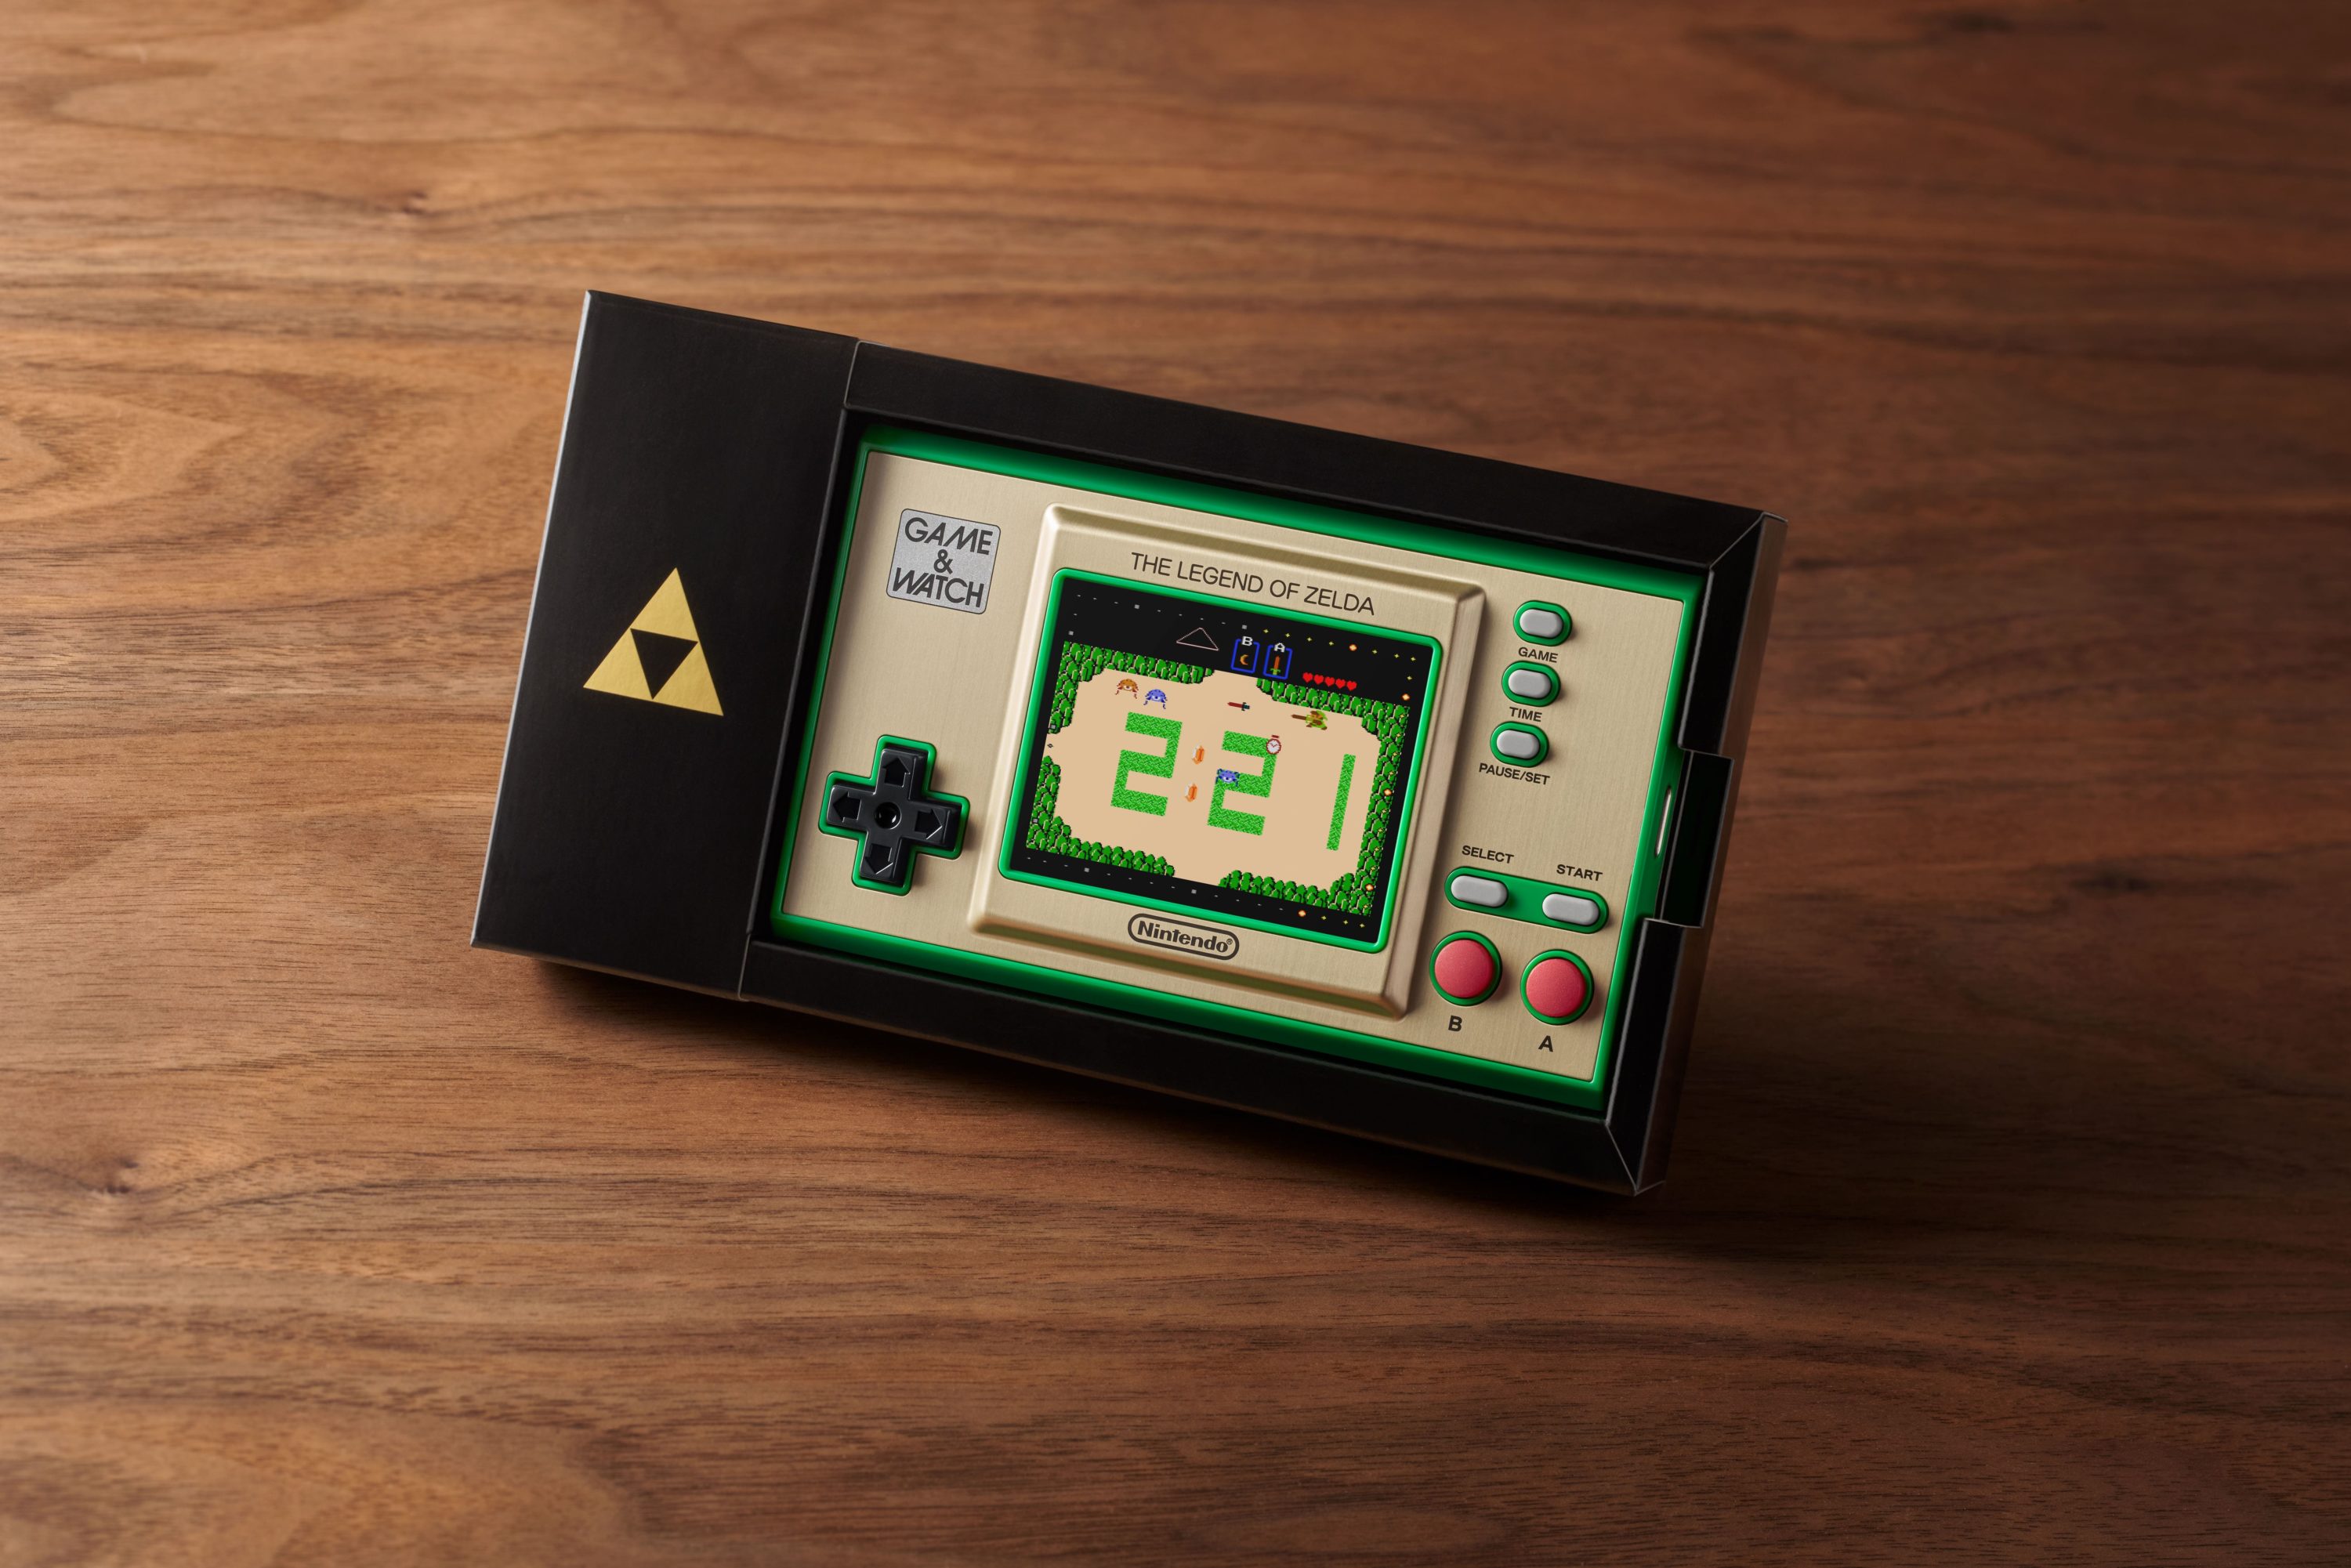 game and watch the legend of zelda photo 3